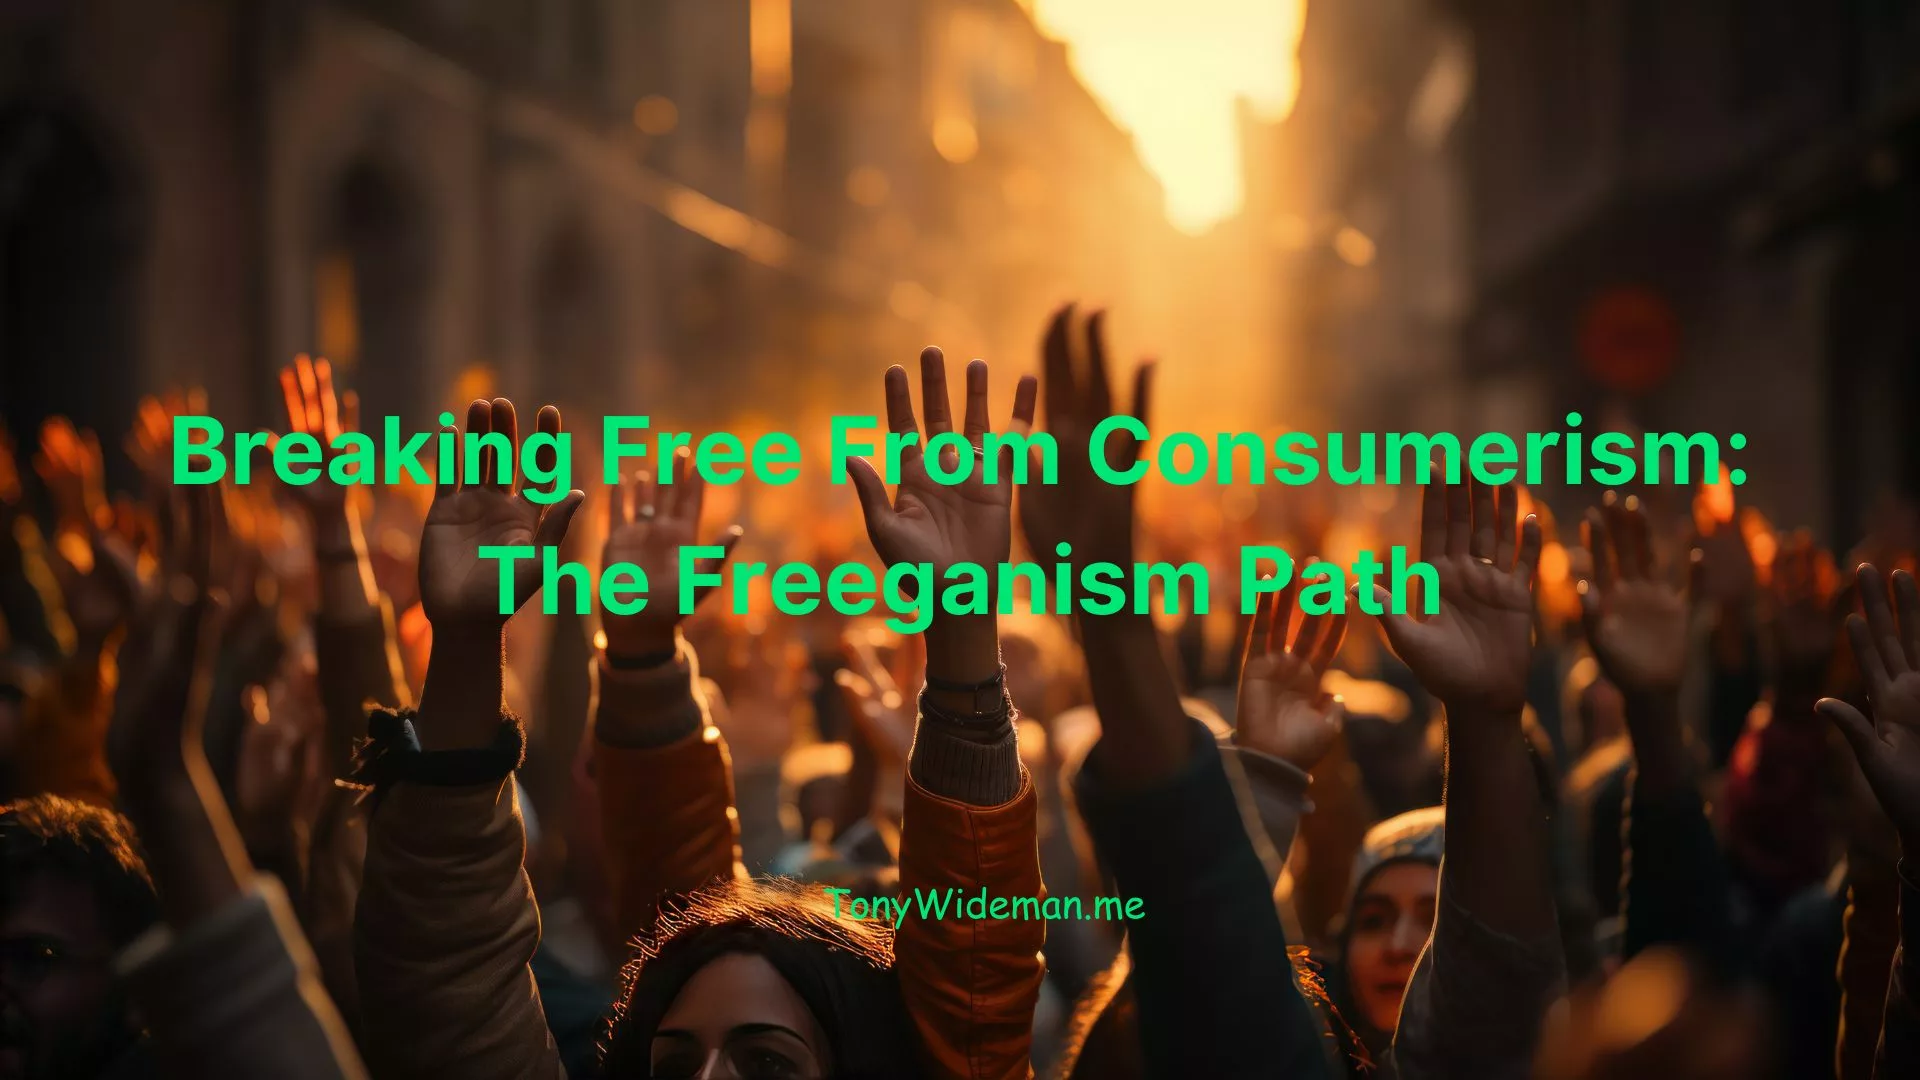 Breaking Free from Consumerism: The Freeganism Path